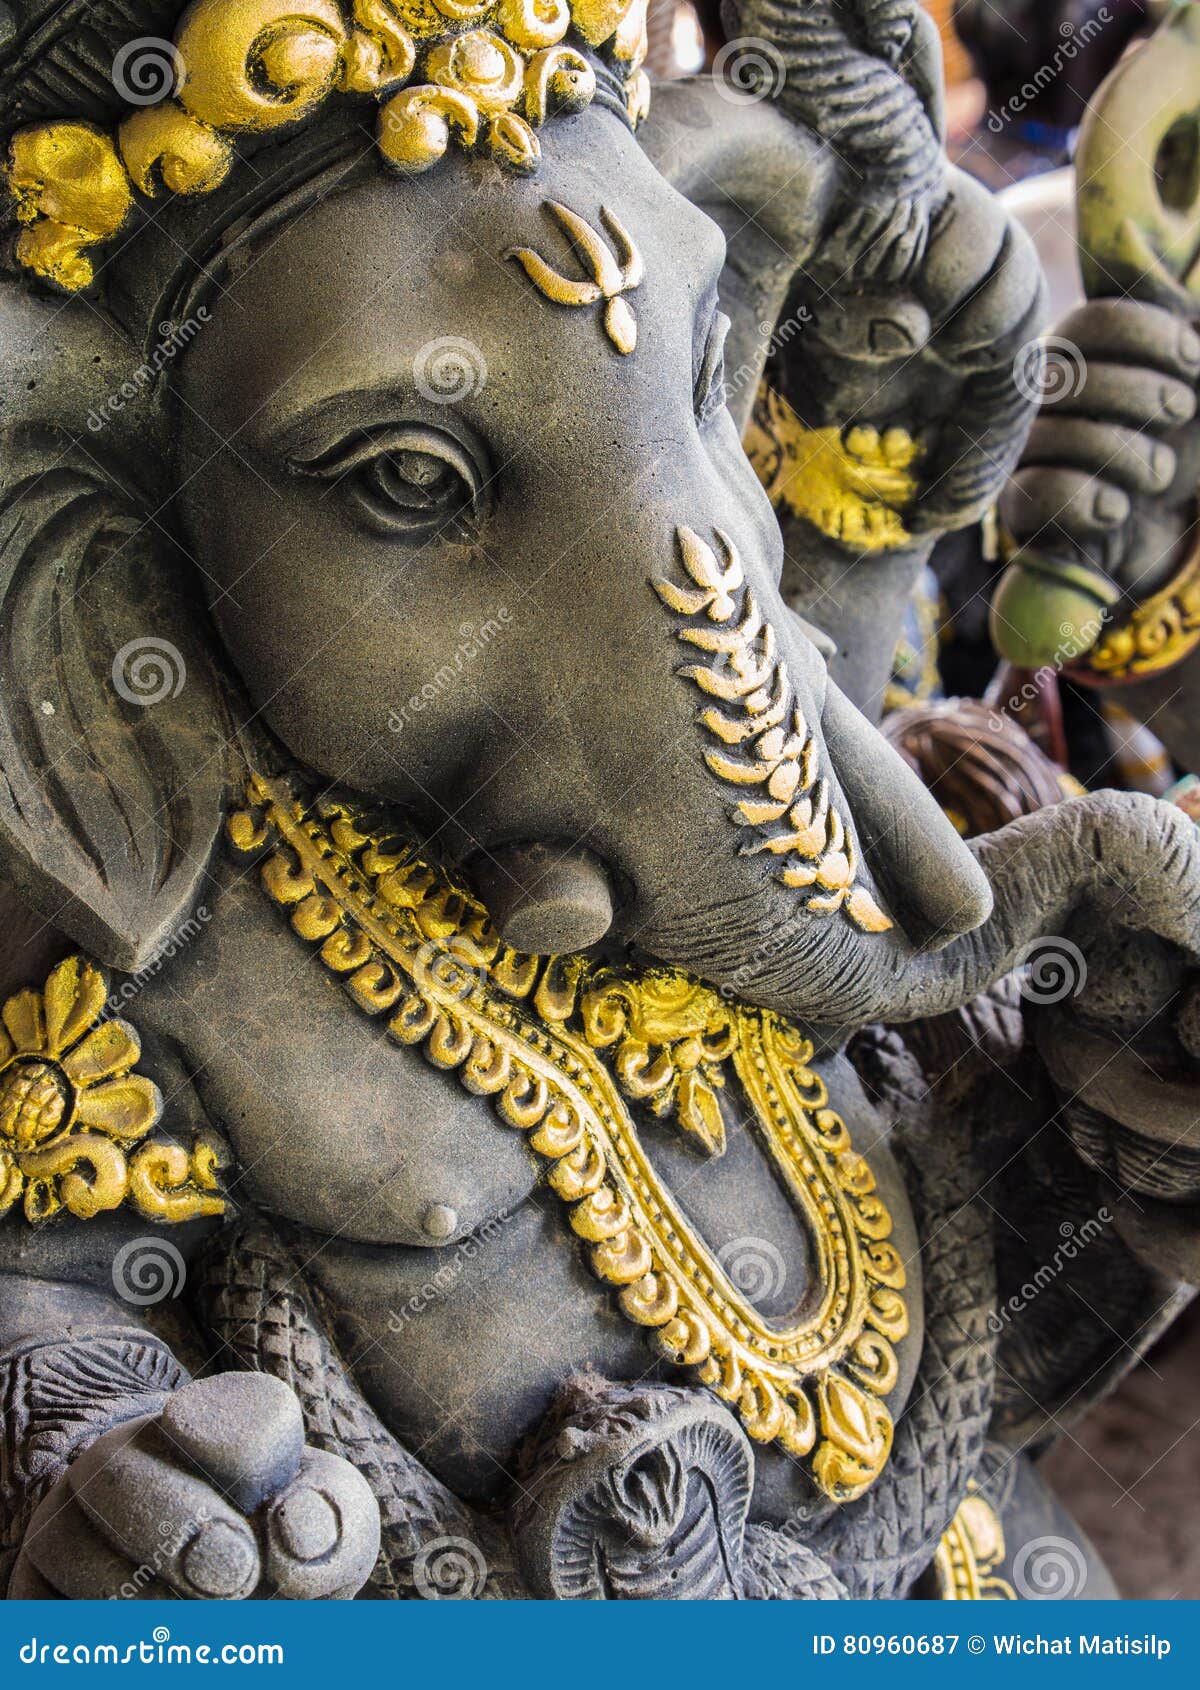 Ganesh Statues in Different Postures Stock Image - Image of ...